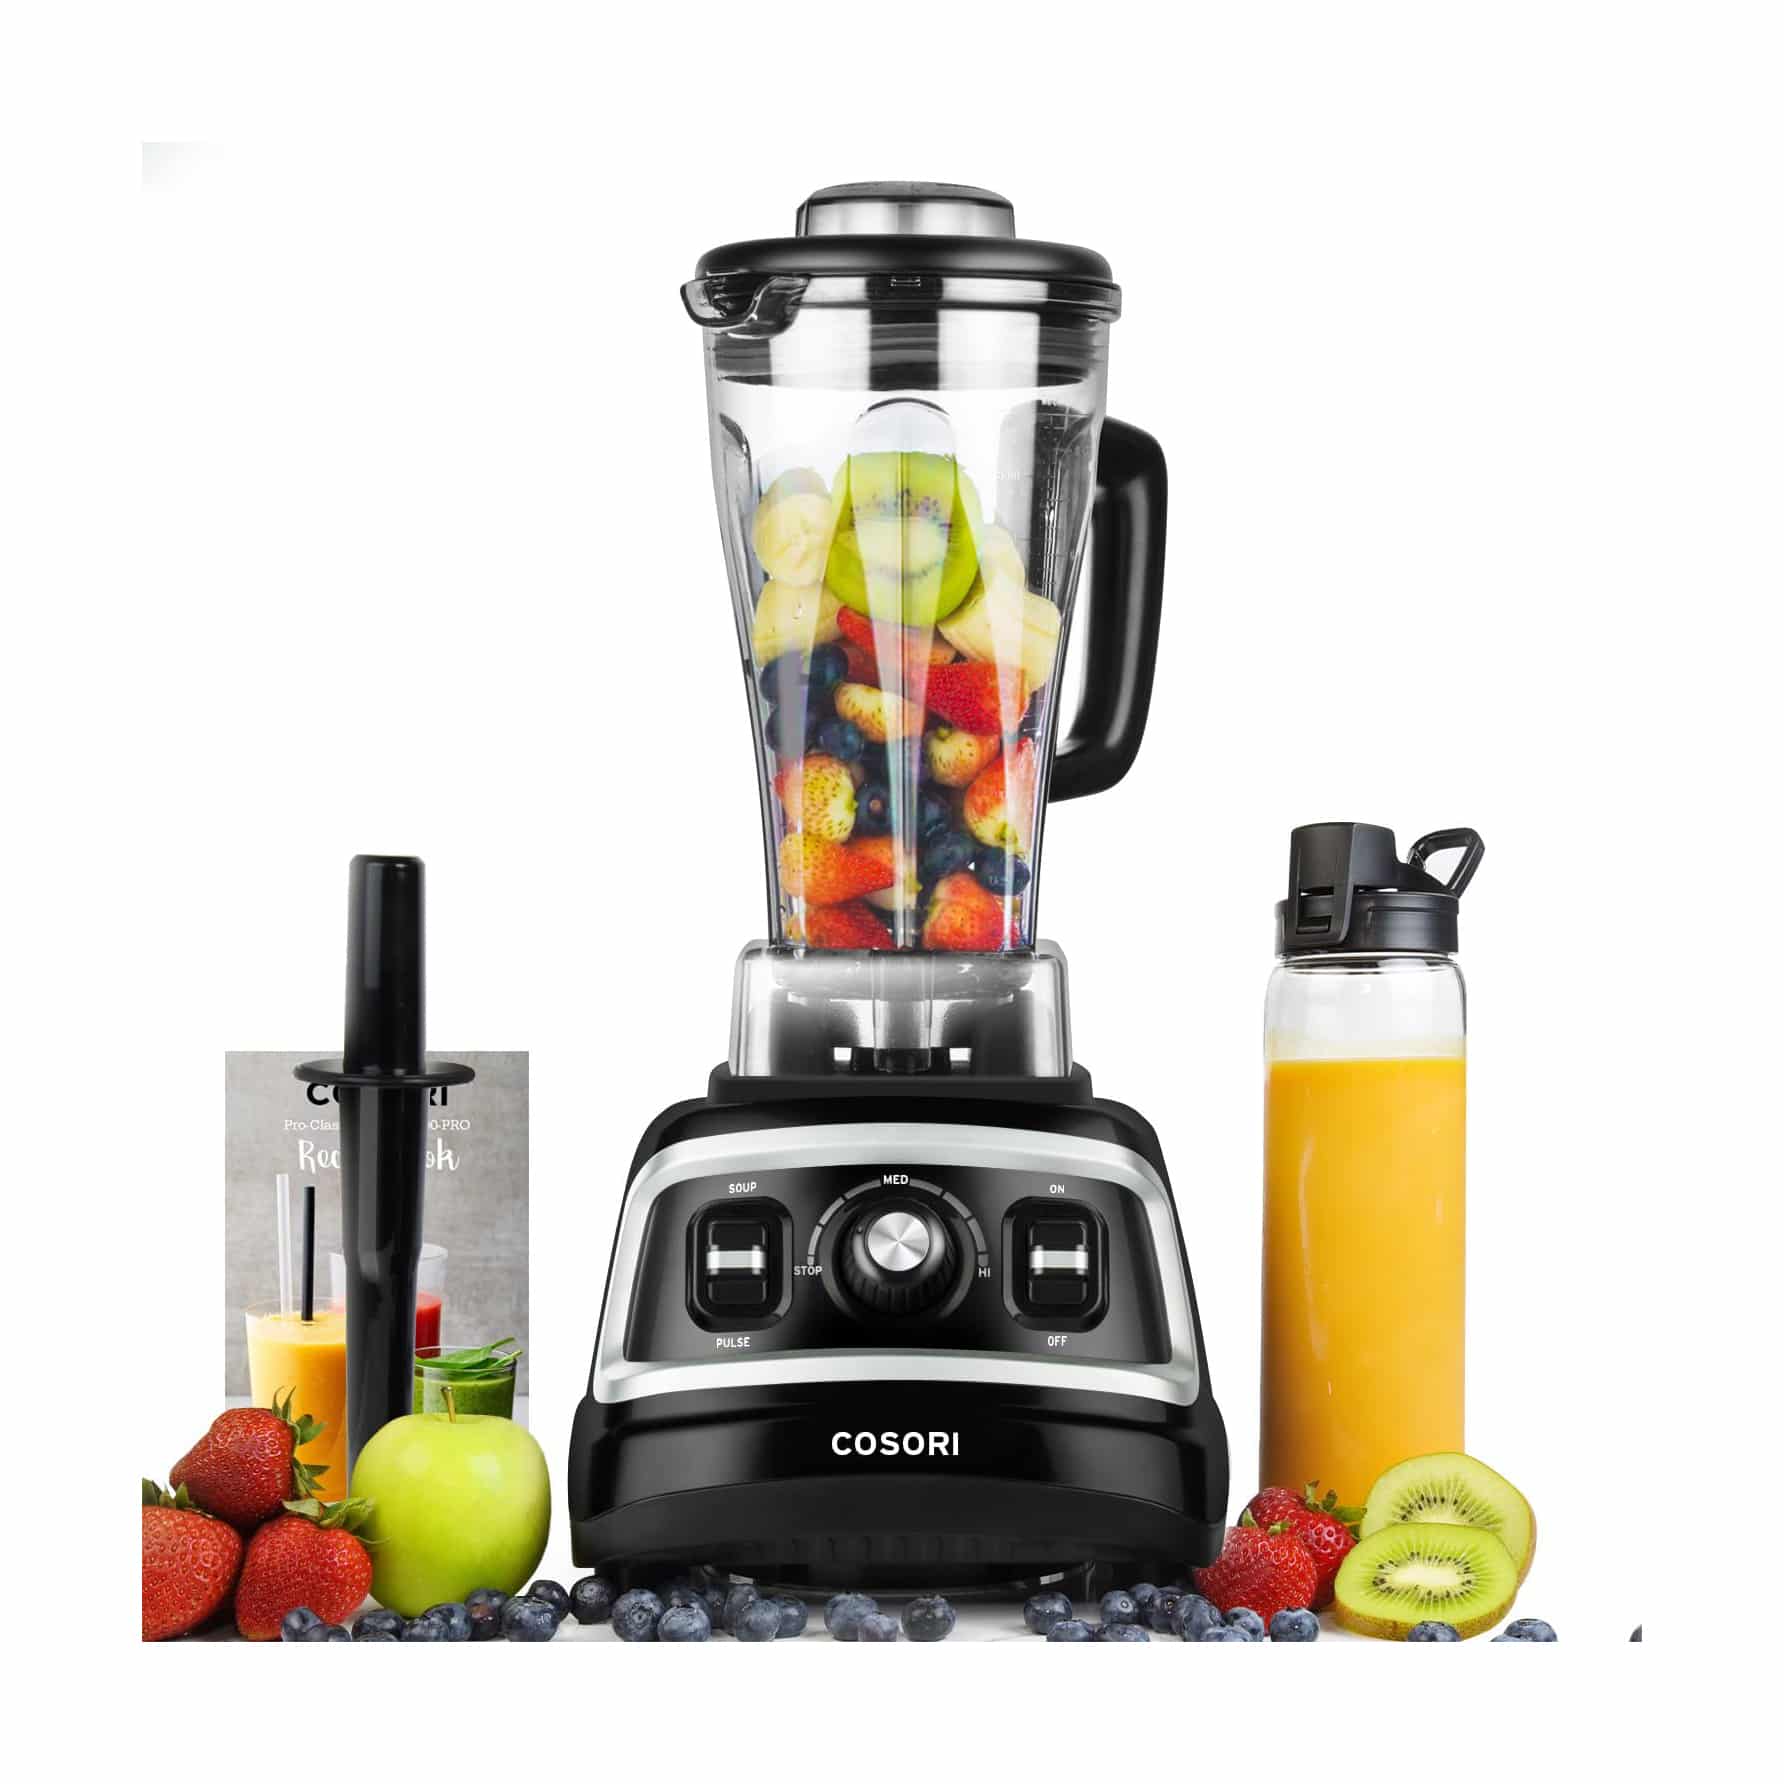 Top 10 Best Blender for Smoothie Bowls in 2021 Reviews Buyer's Guide